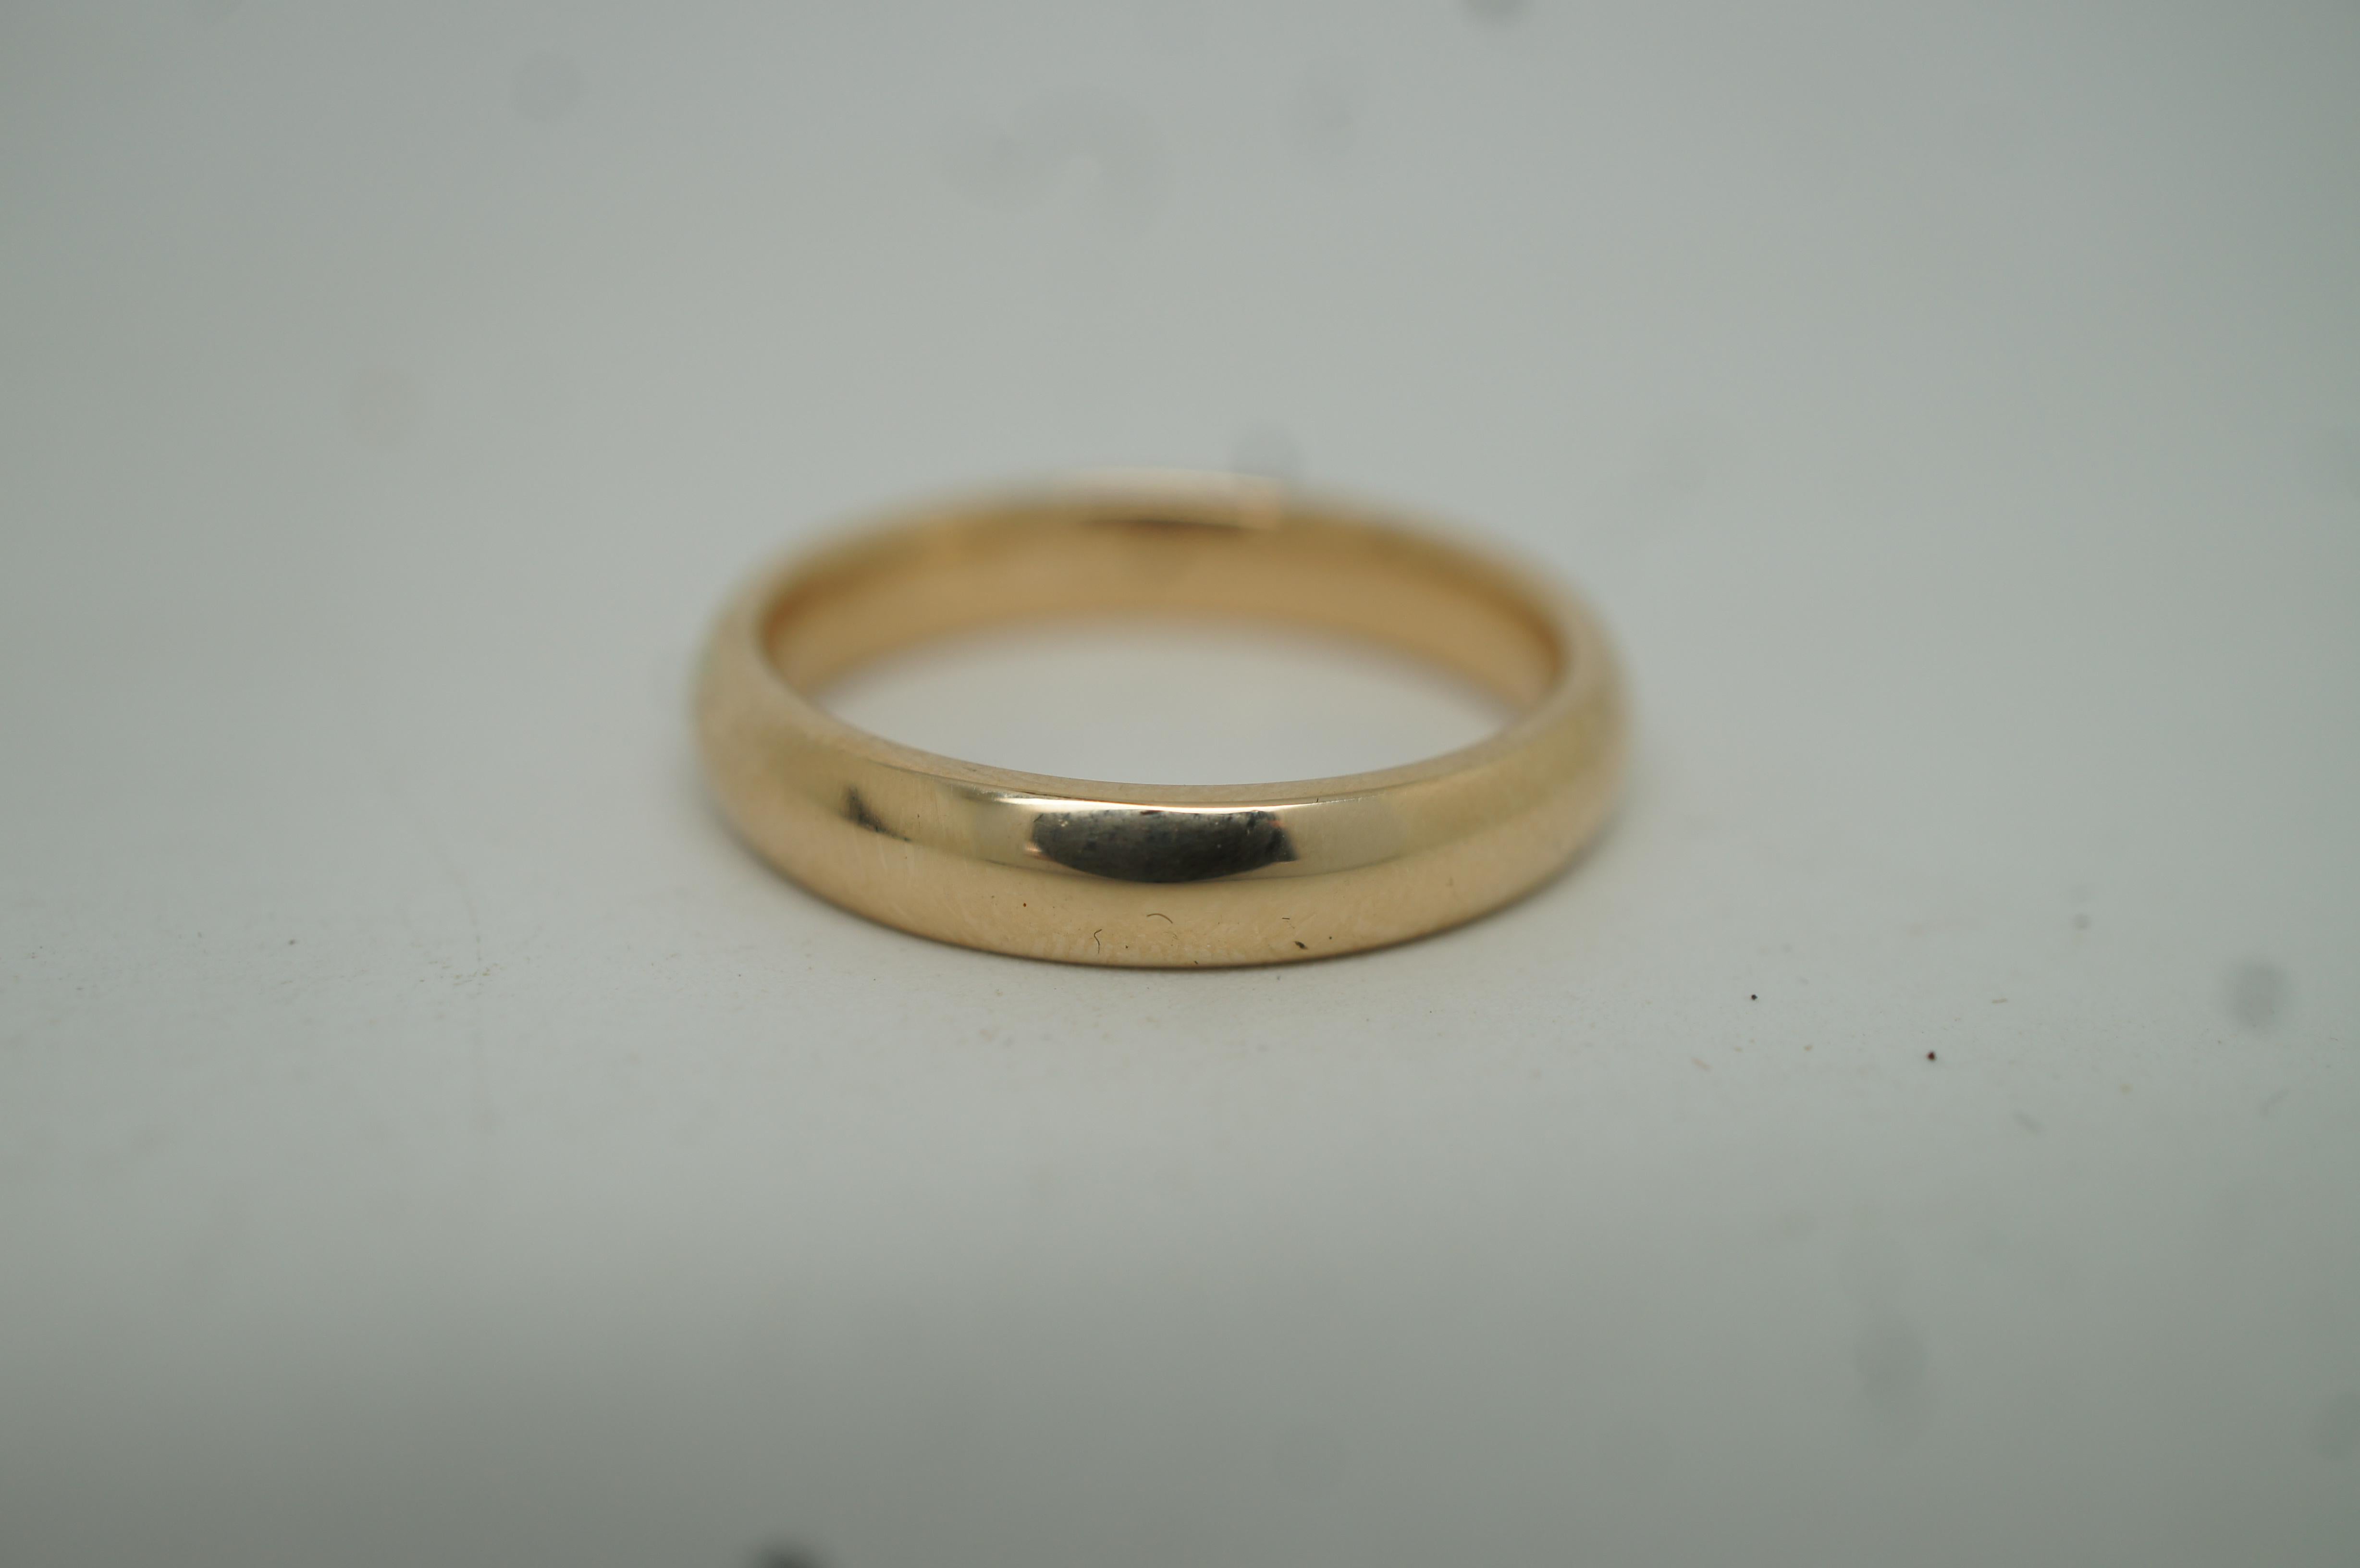 Vintage 14k Solid Yellow Gold Wedding Band Engagement Ring 7g For Sale 2